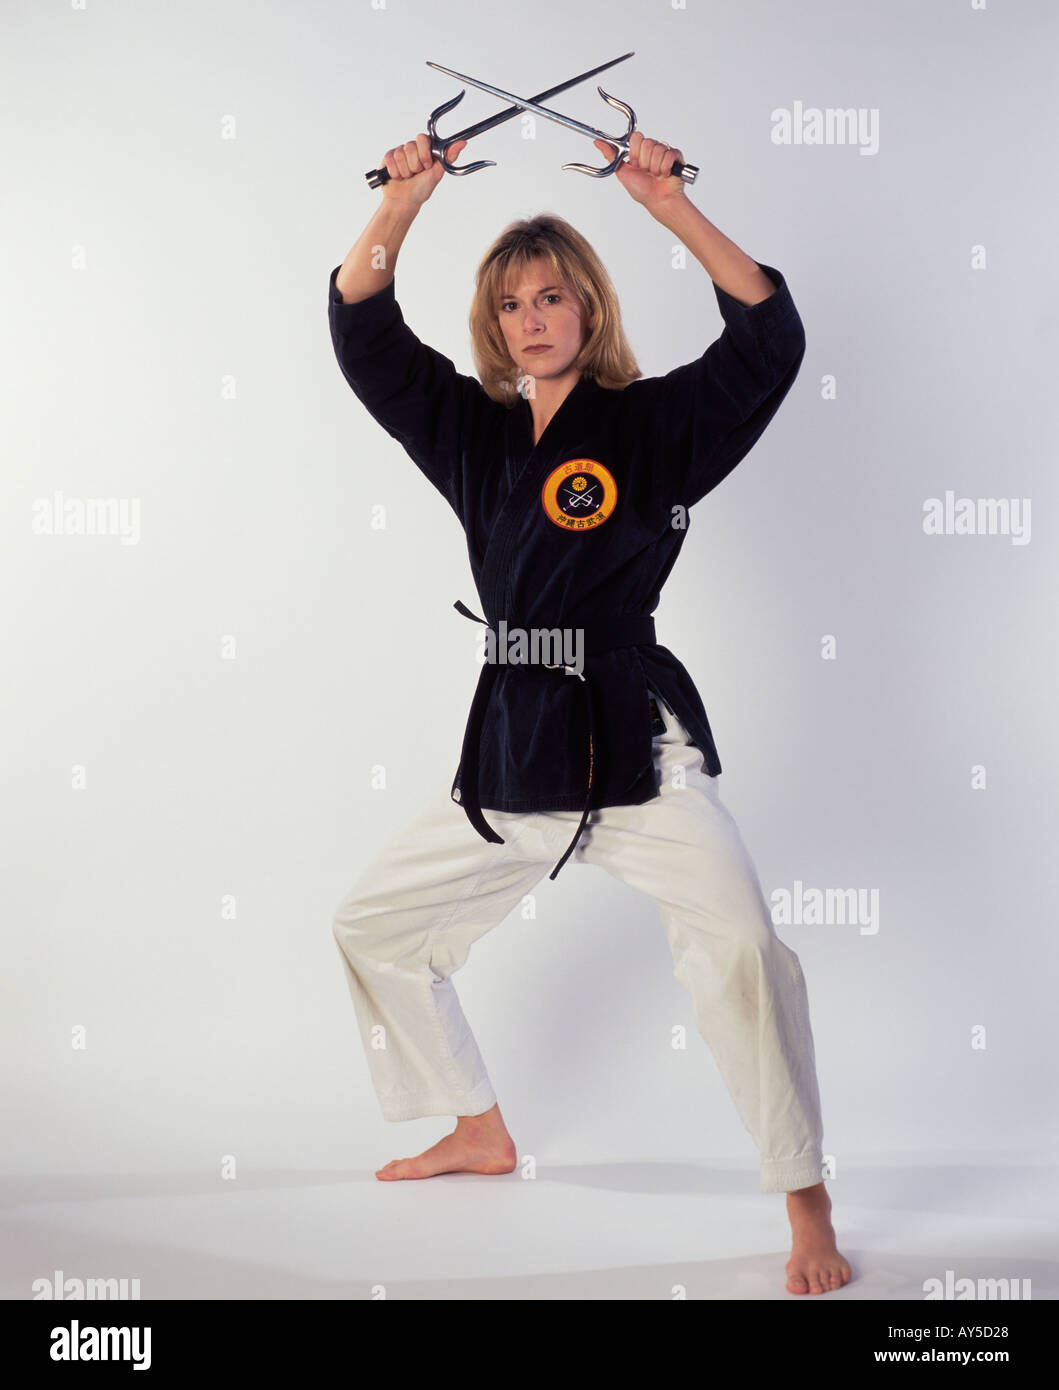 woman black belt with ancient weapons Stock Photo